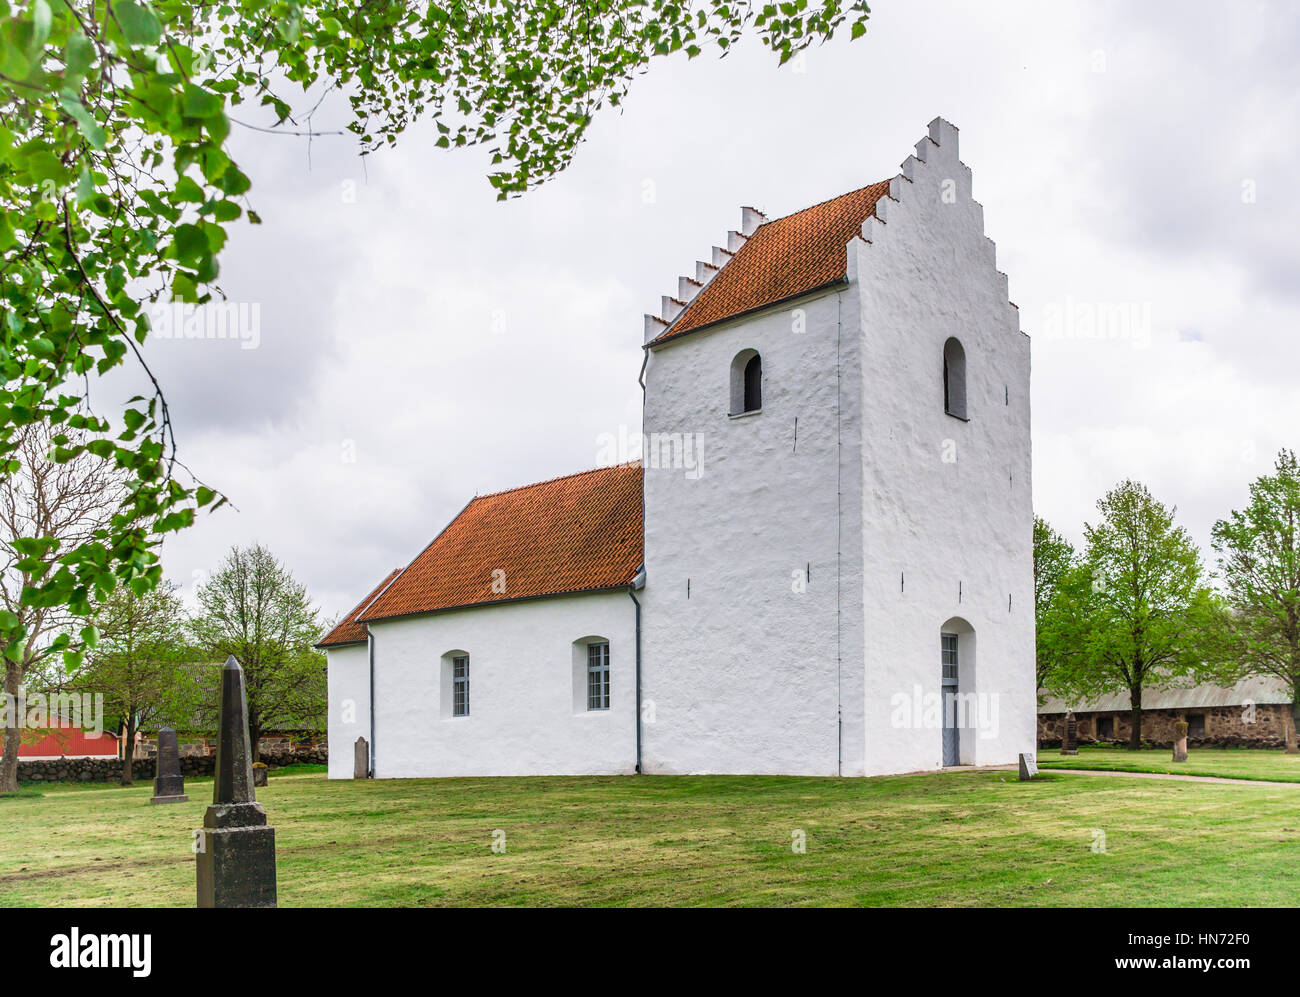 White rural church in the countryside, situated under some trees on a green lawn, Sjobo, Sweden - May 12, 2014 Stock Photo